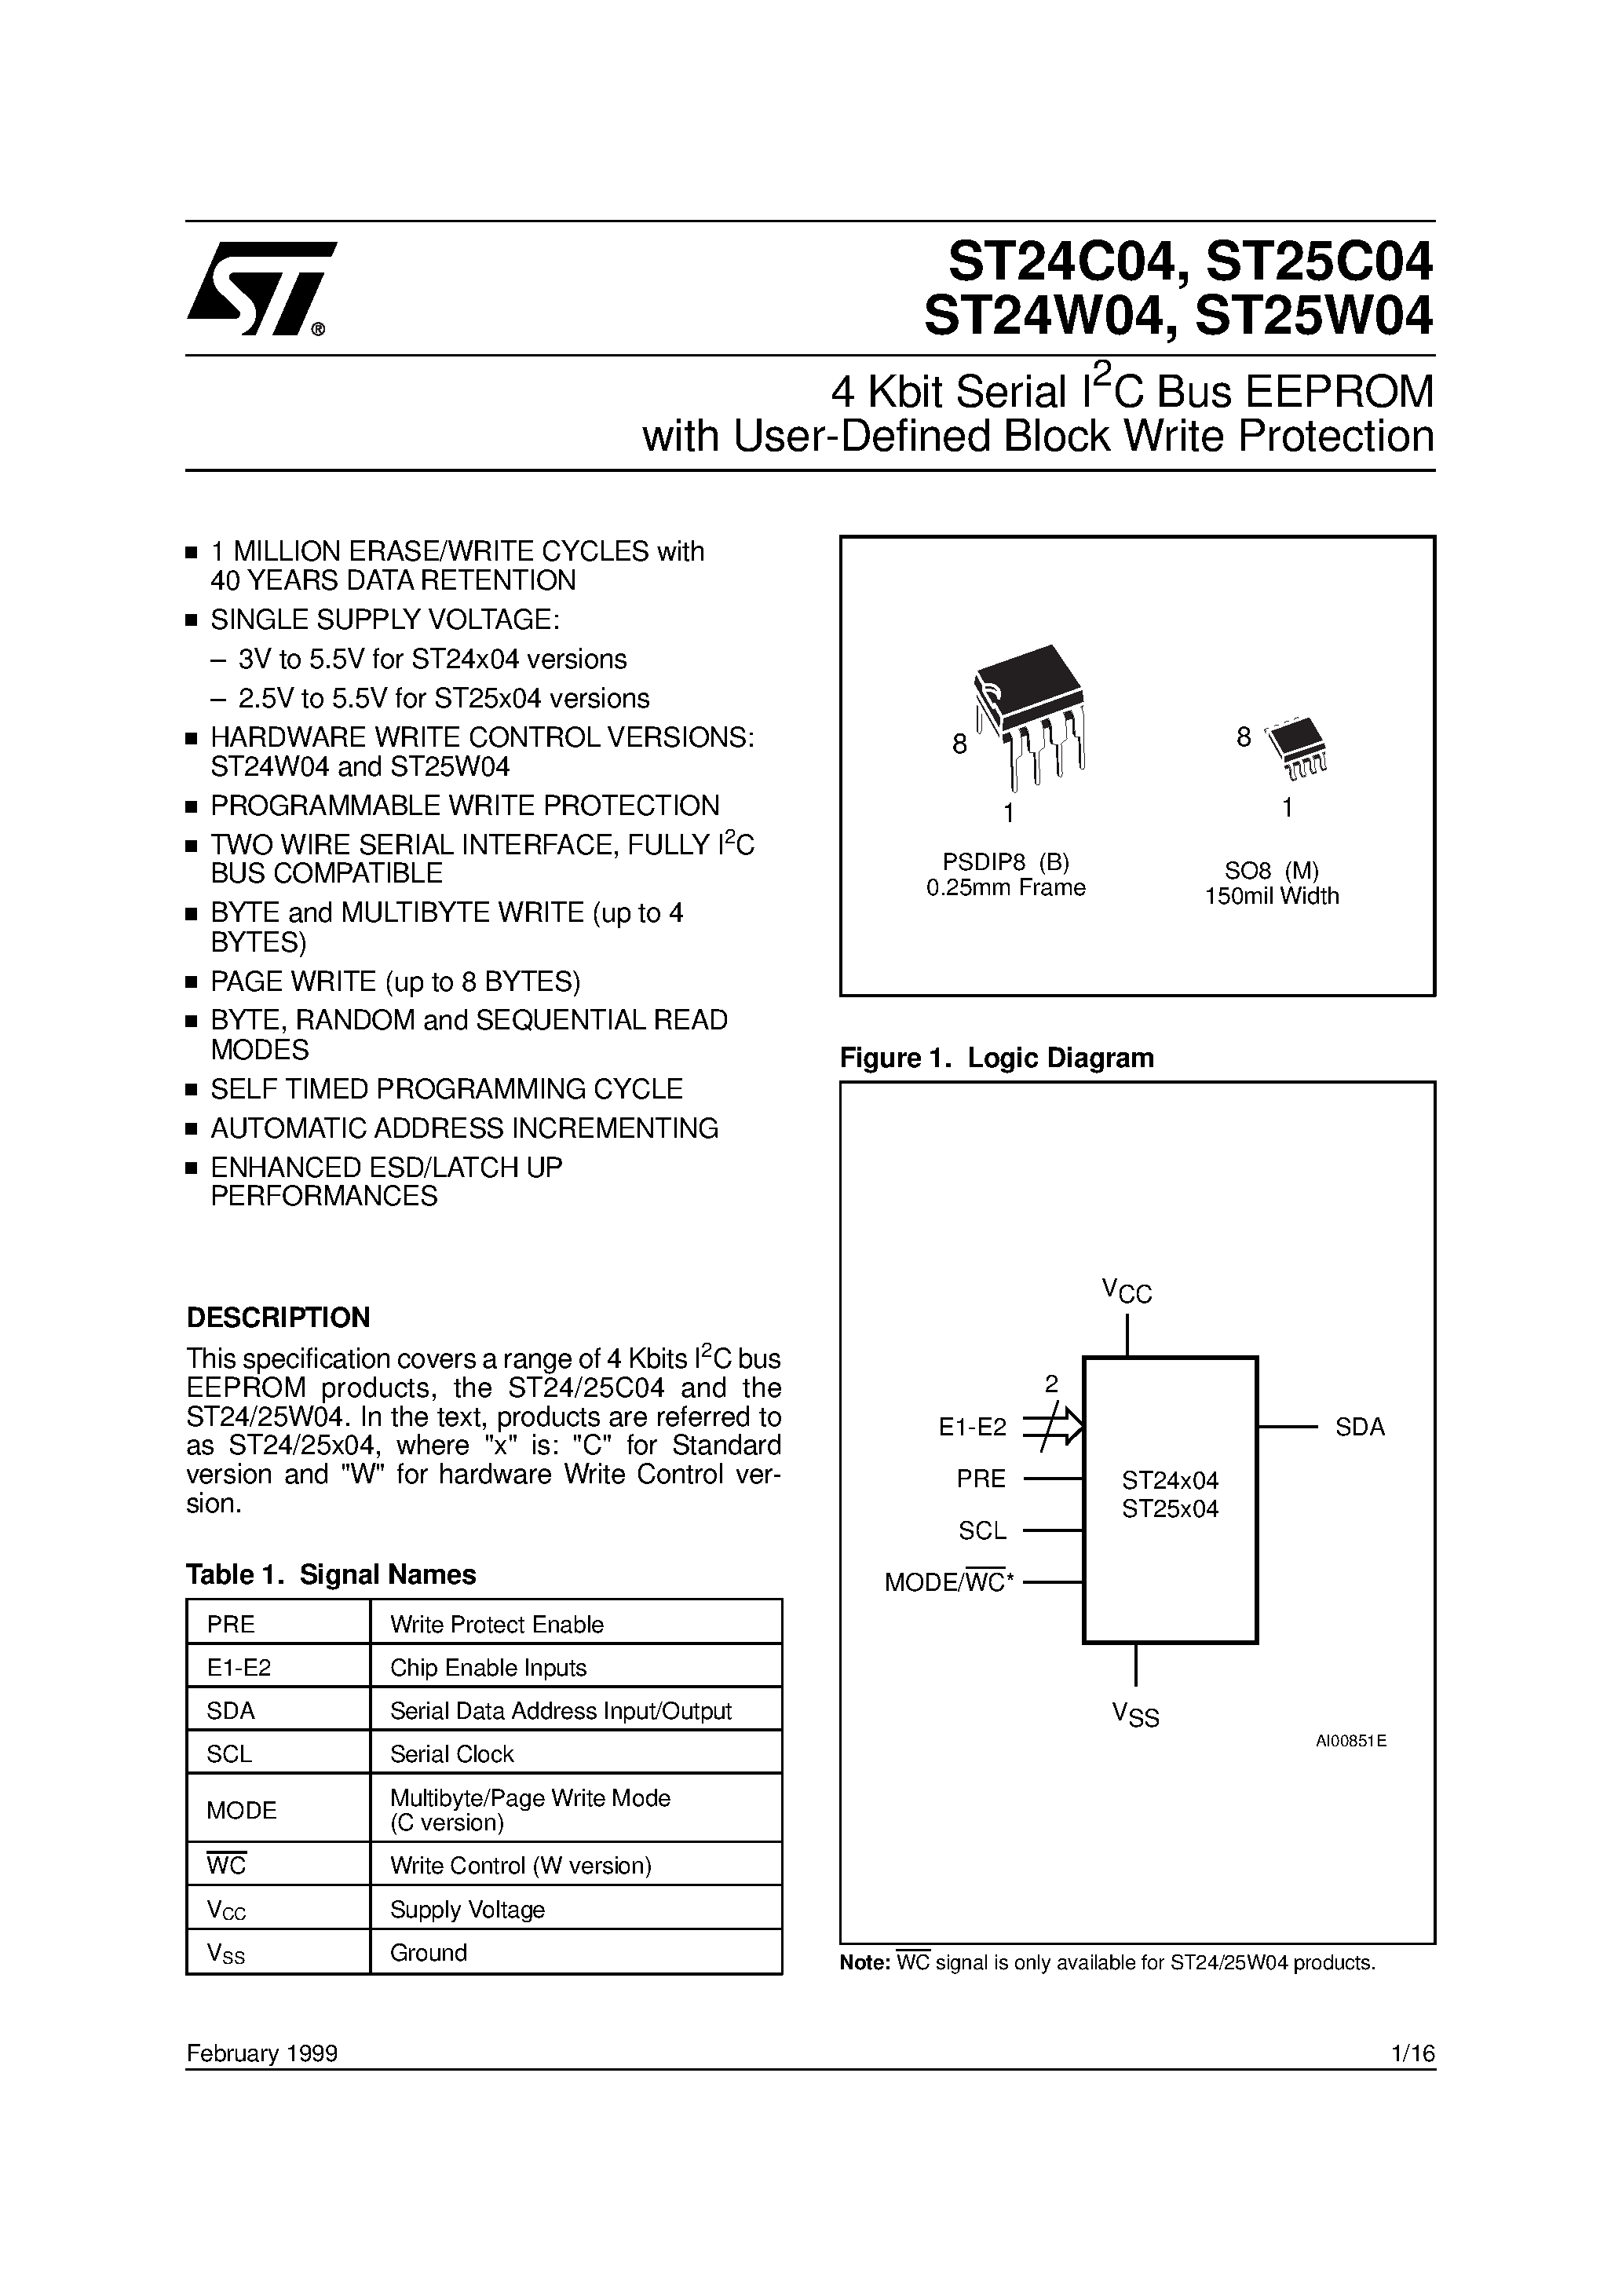 Datasheet ST24W04 - 4 Kbit Serial I2C Bus EEPROM with User-Defined Block Write Protection page 1